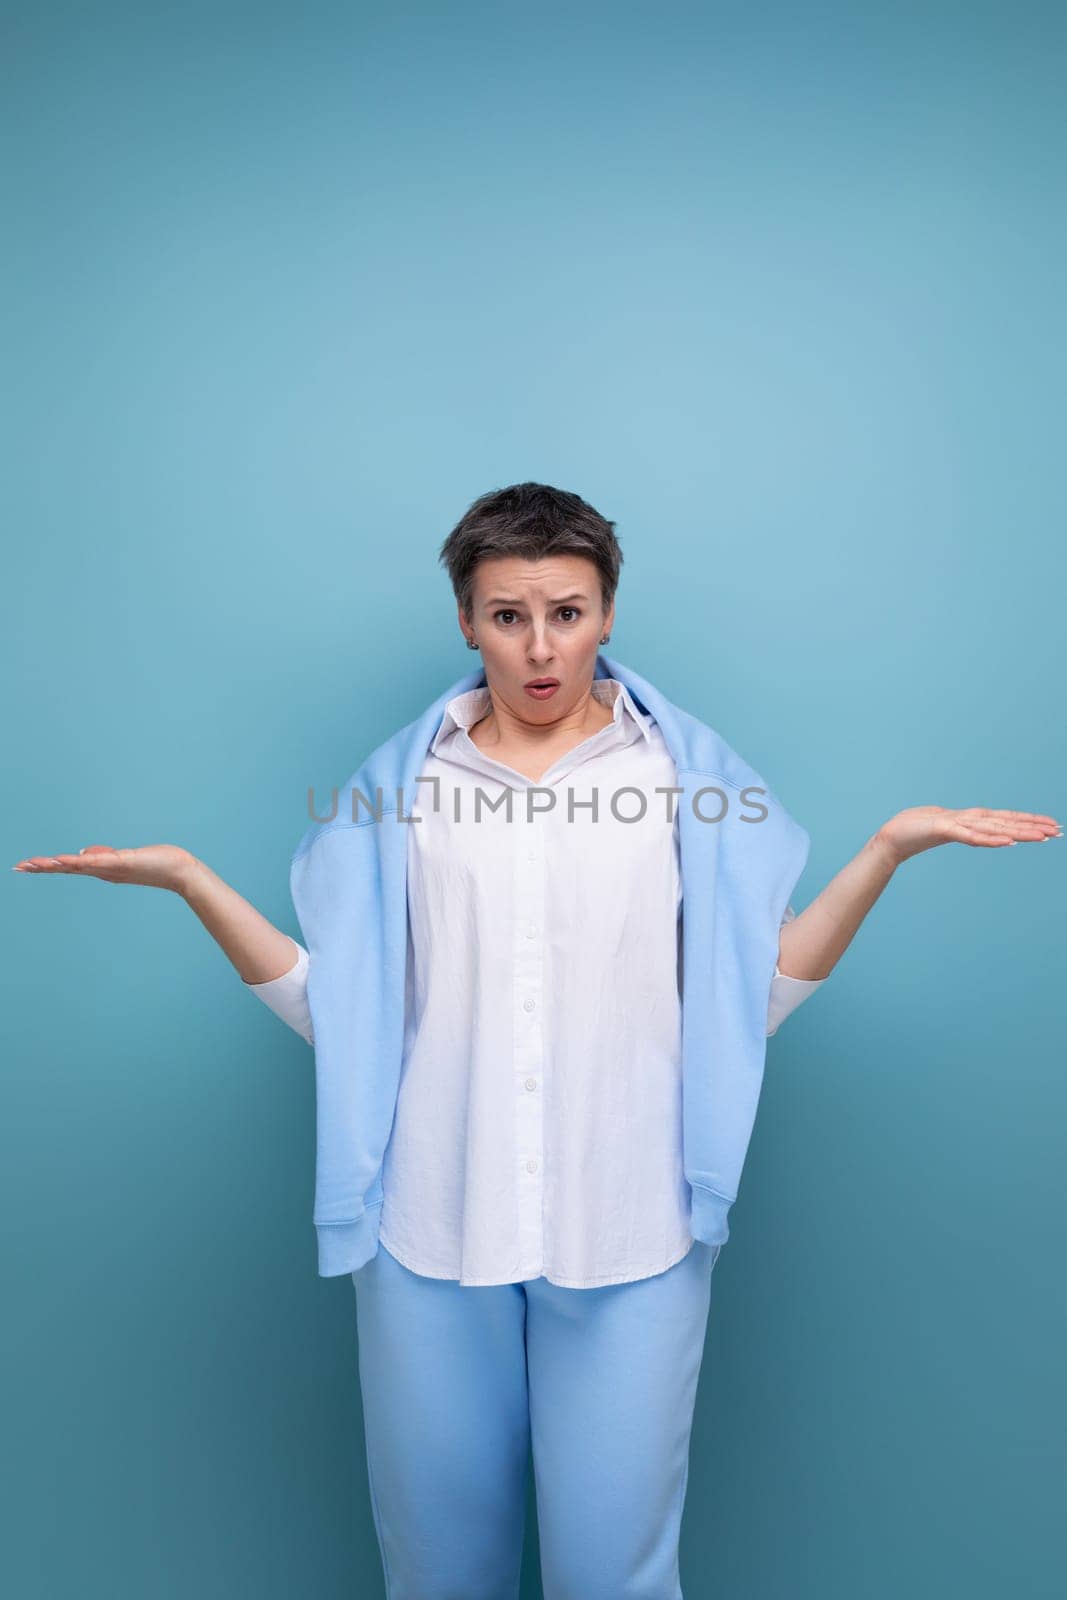 indignant surprised brunette woman with short haircut in white shirt on studio background.